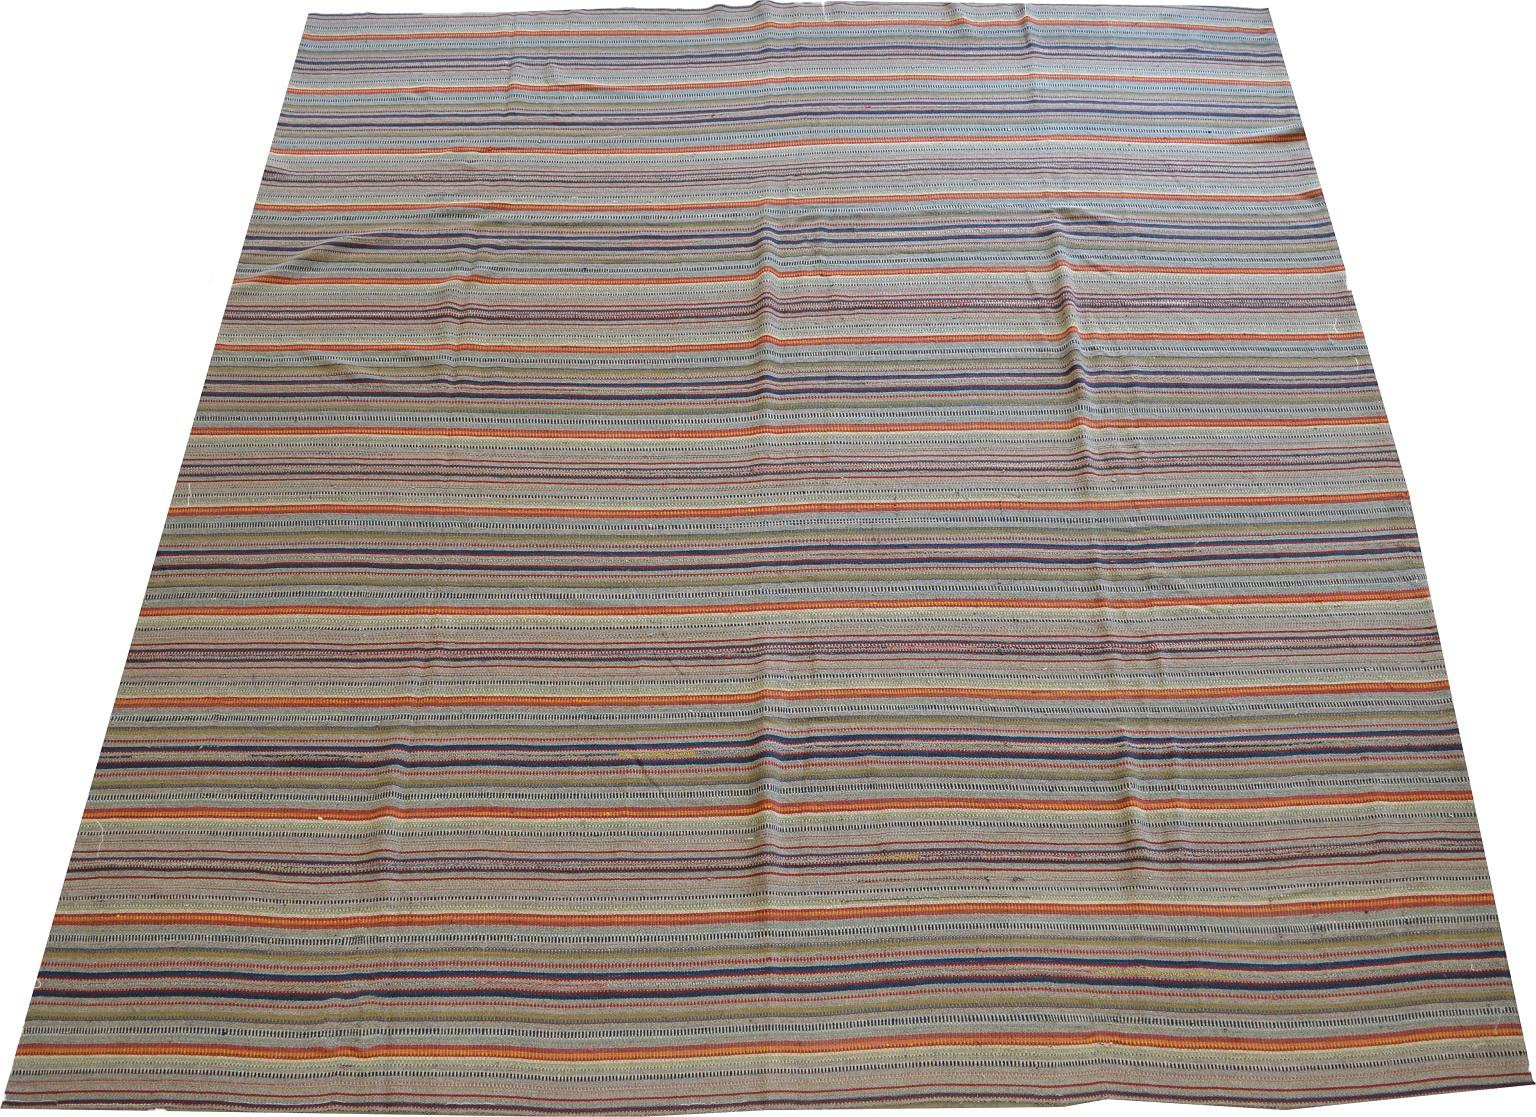 This antique Persian Kilim circa 1900 consists of handspun vegetal dyed and undyed wools. The colorful patterns of red, orange, yellow, blue and green amid a cream and gray background showcase the artist's creativity. The size is 9'7